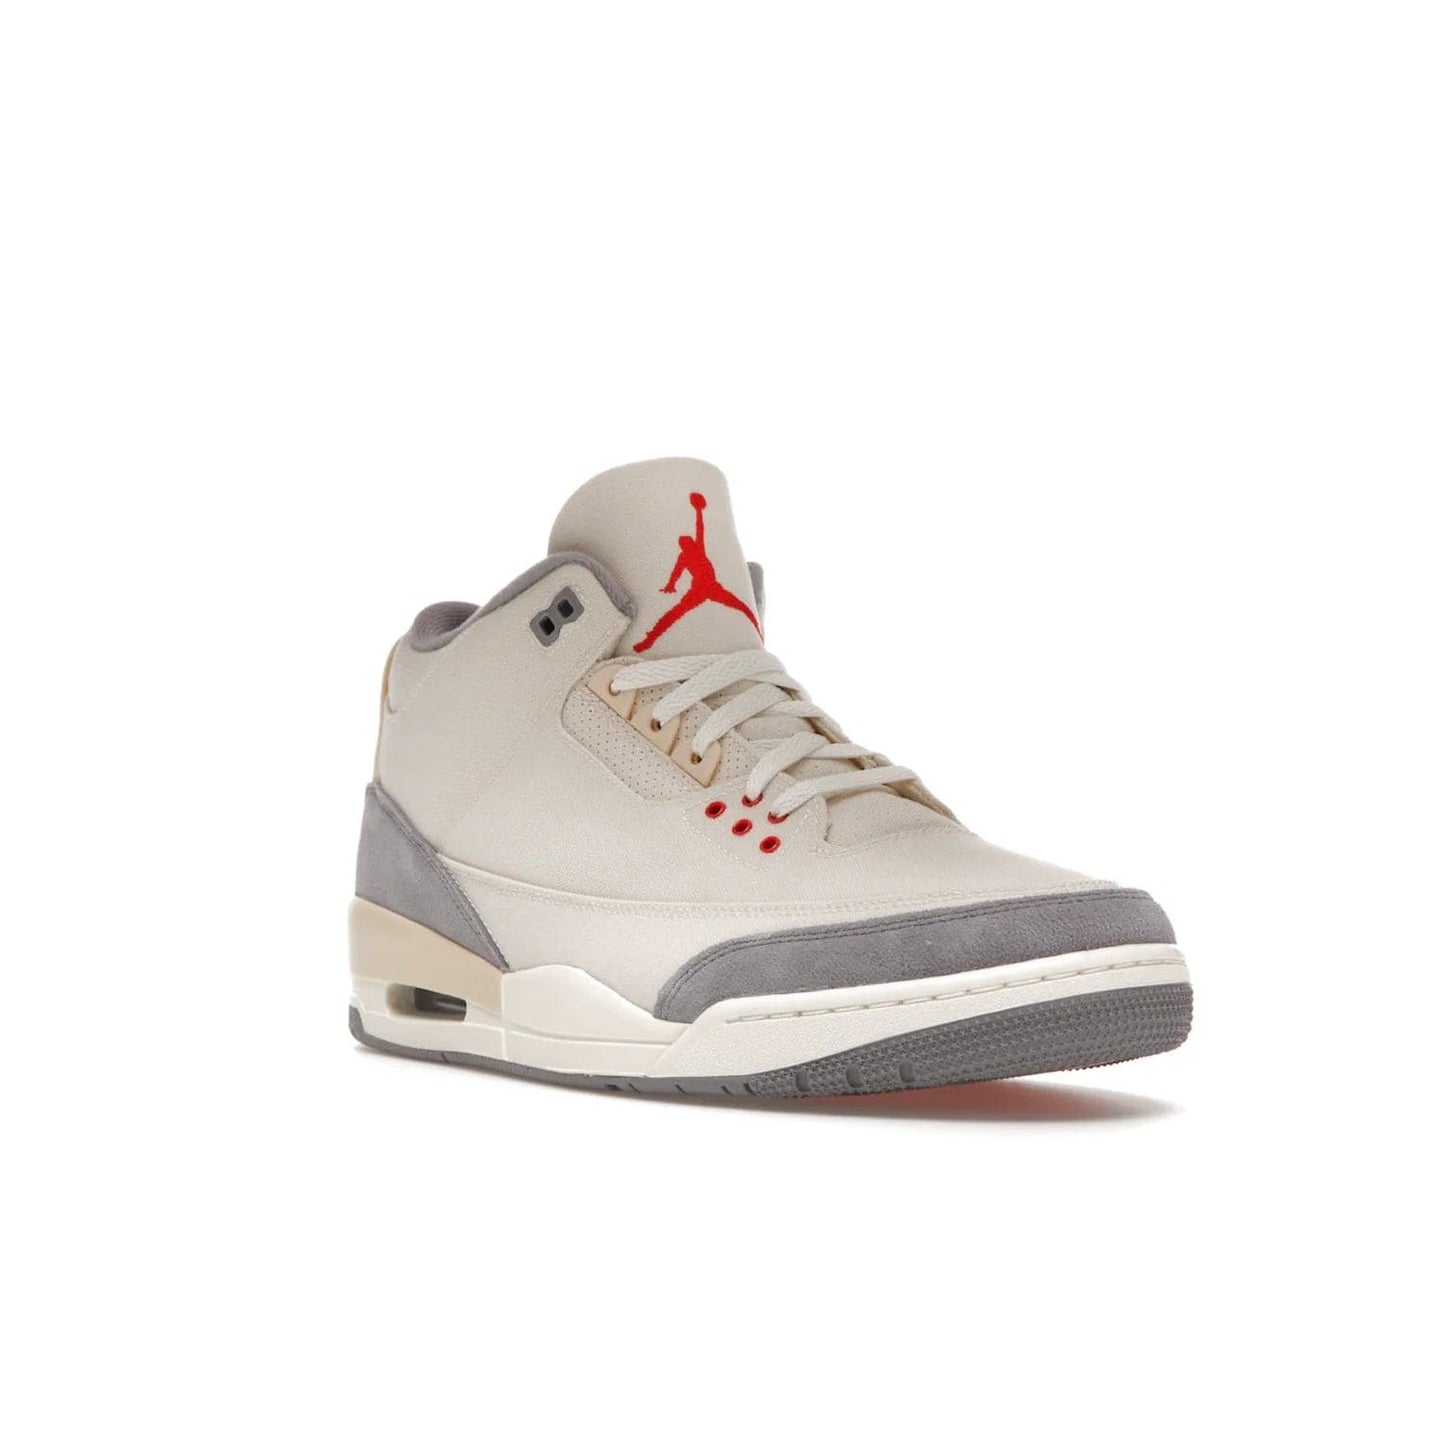 Jordan 3 Retro Muslin - Image 6 - Only at www.BallersClubKickz.com - Eye-catching Air Jordan 3 Retro Muslin in a neutral palette of grey, cream, and red. Featuring canvas upper, suede overlays and white/grey Air Max sole. Available in March 2022.